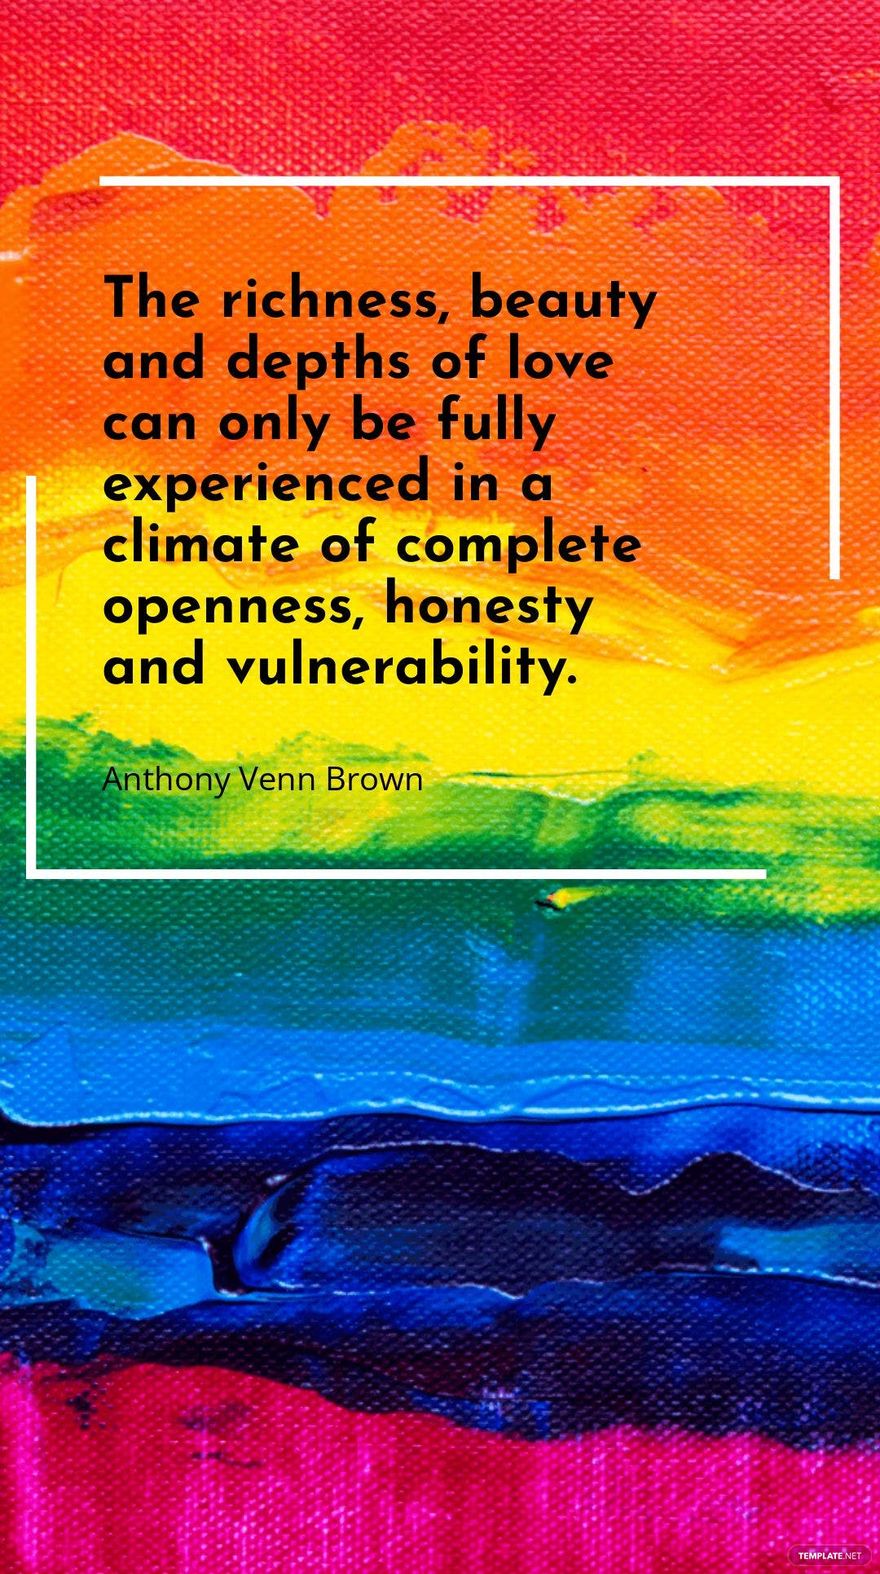 Anthony Venn Brown - The richness, beauty and depths of love can only be fully experienced in a climate of complete openness, honesty and vulnerability.